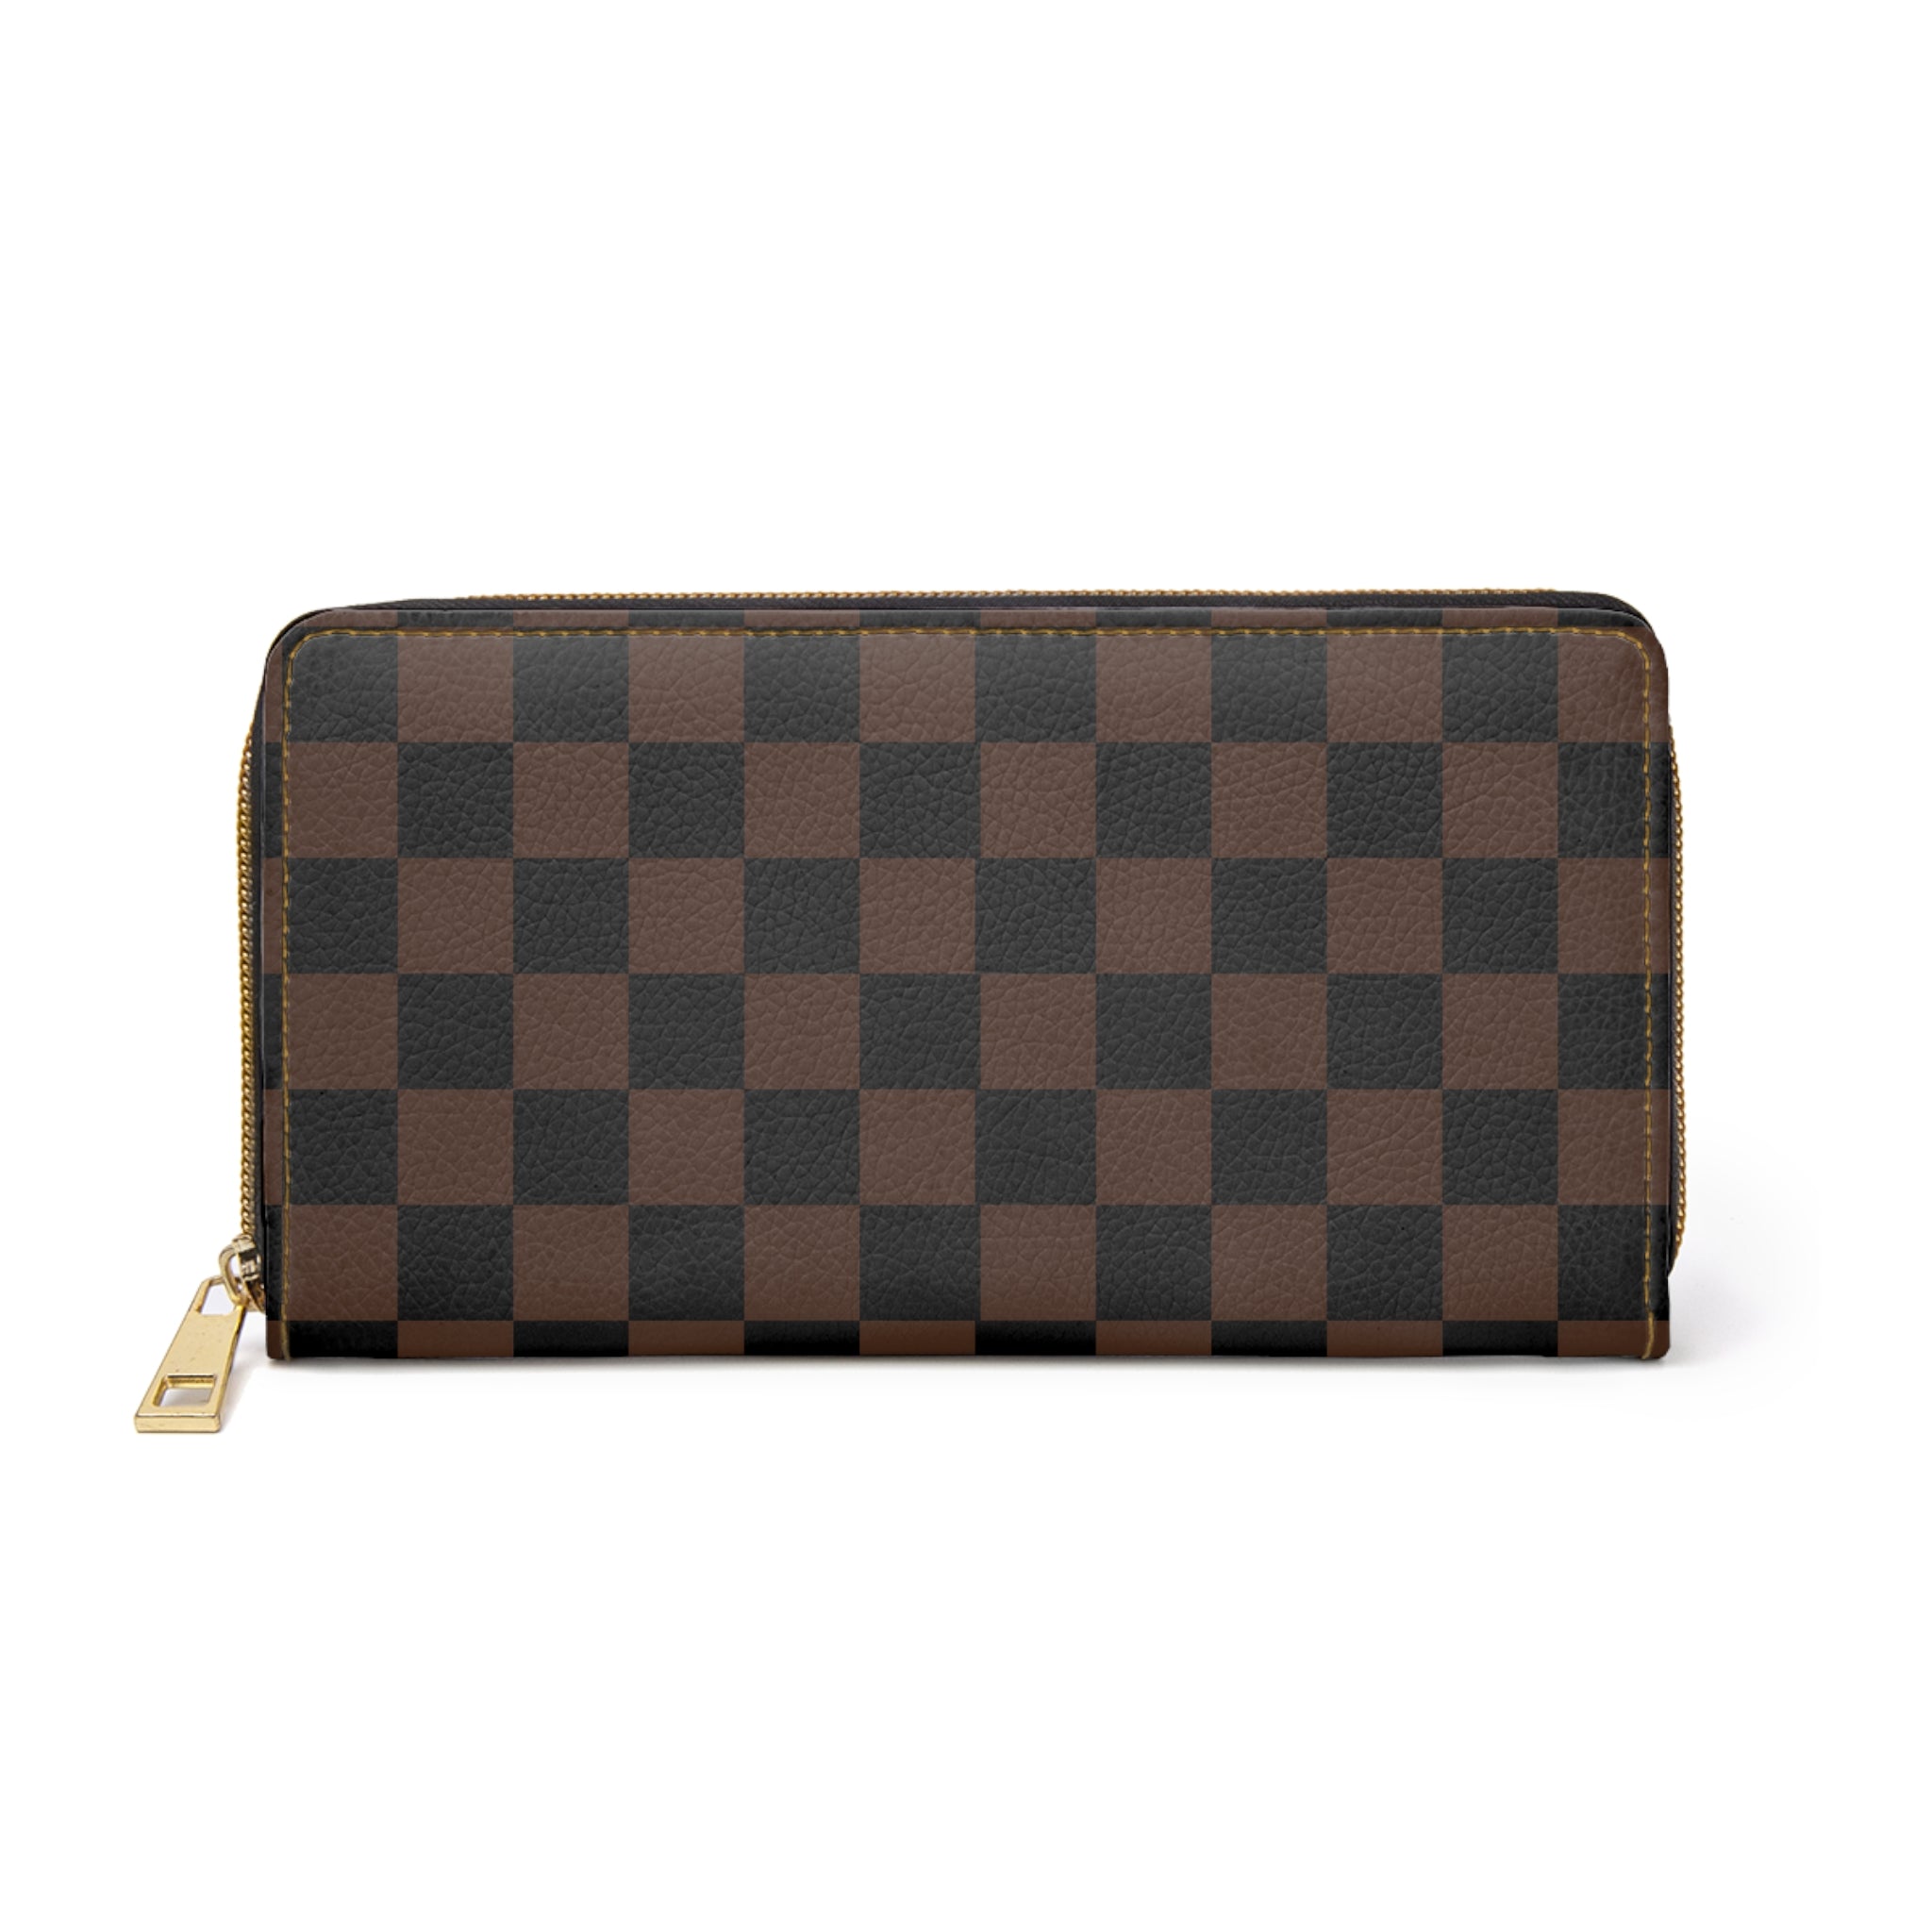  Check Mate in Dark Brown and Black Ladies Wallet, Zipper Pouch, Coin Purse, Zippered Wallet, Cute Purse AccessoriesOnesizeWhite